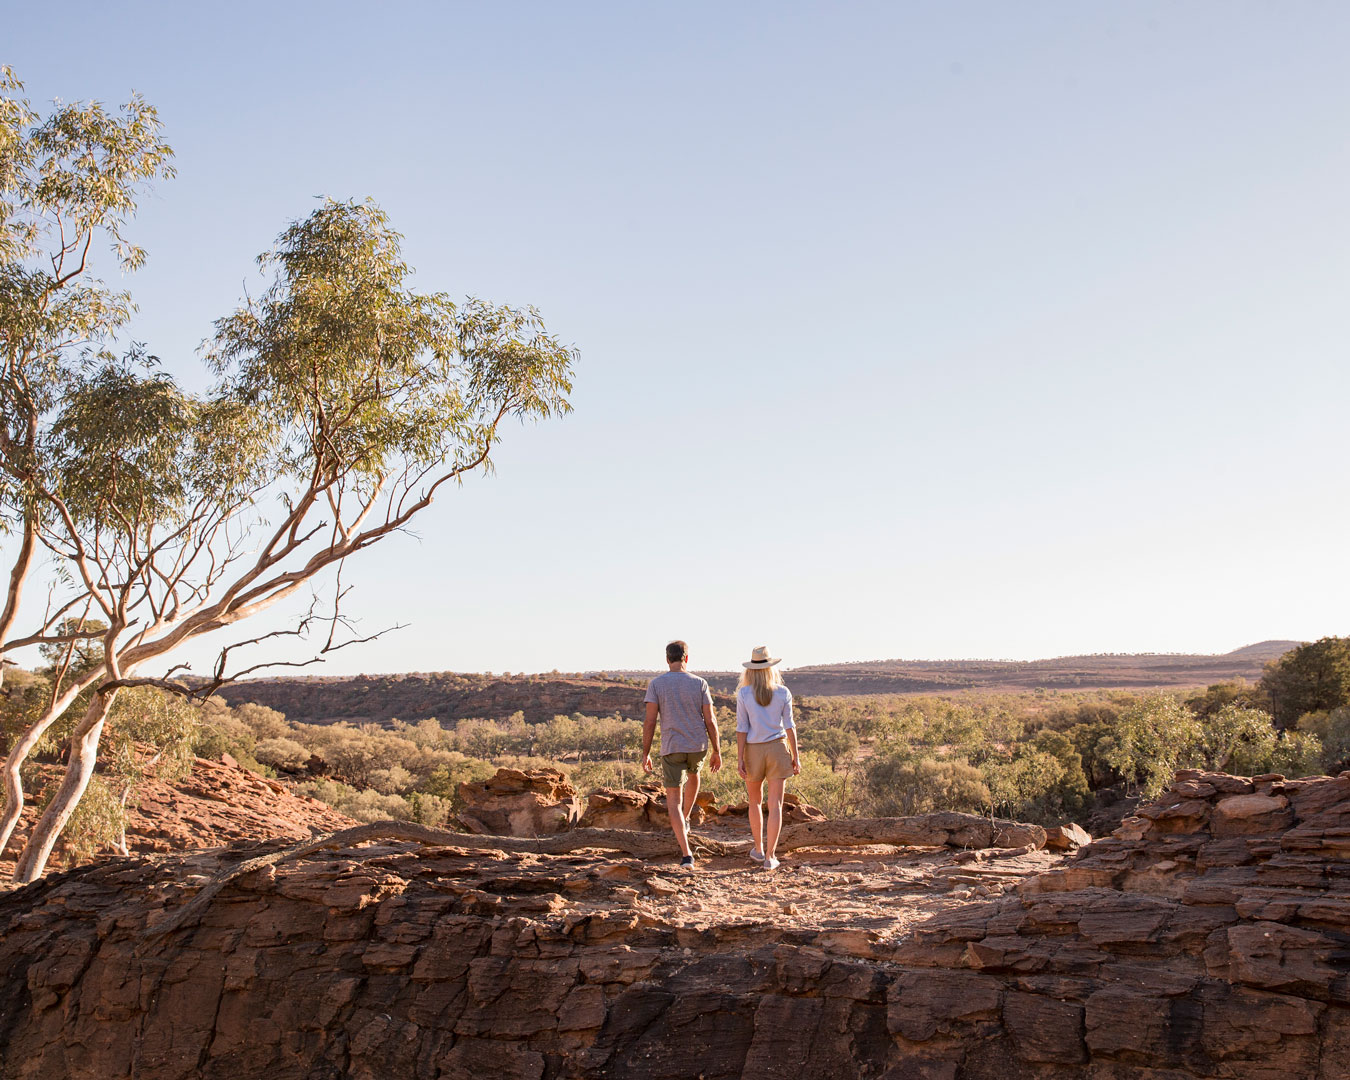 Couple in outback landscape